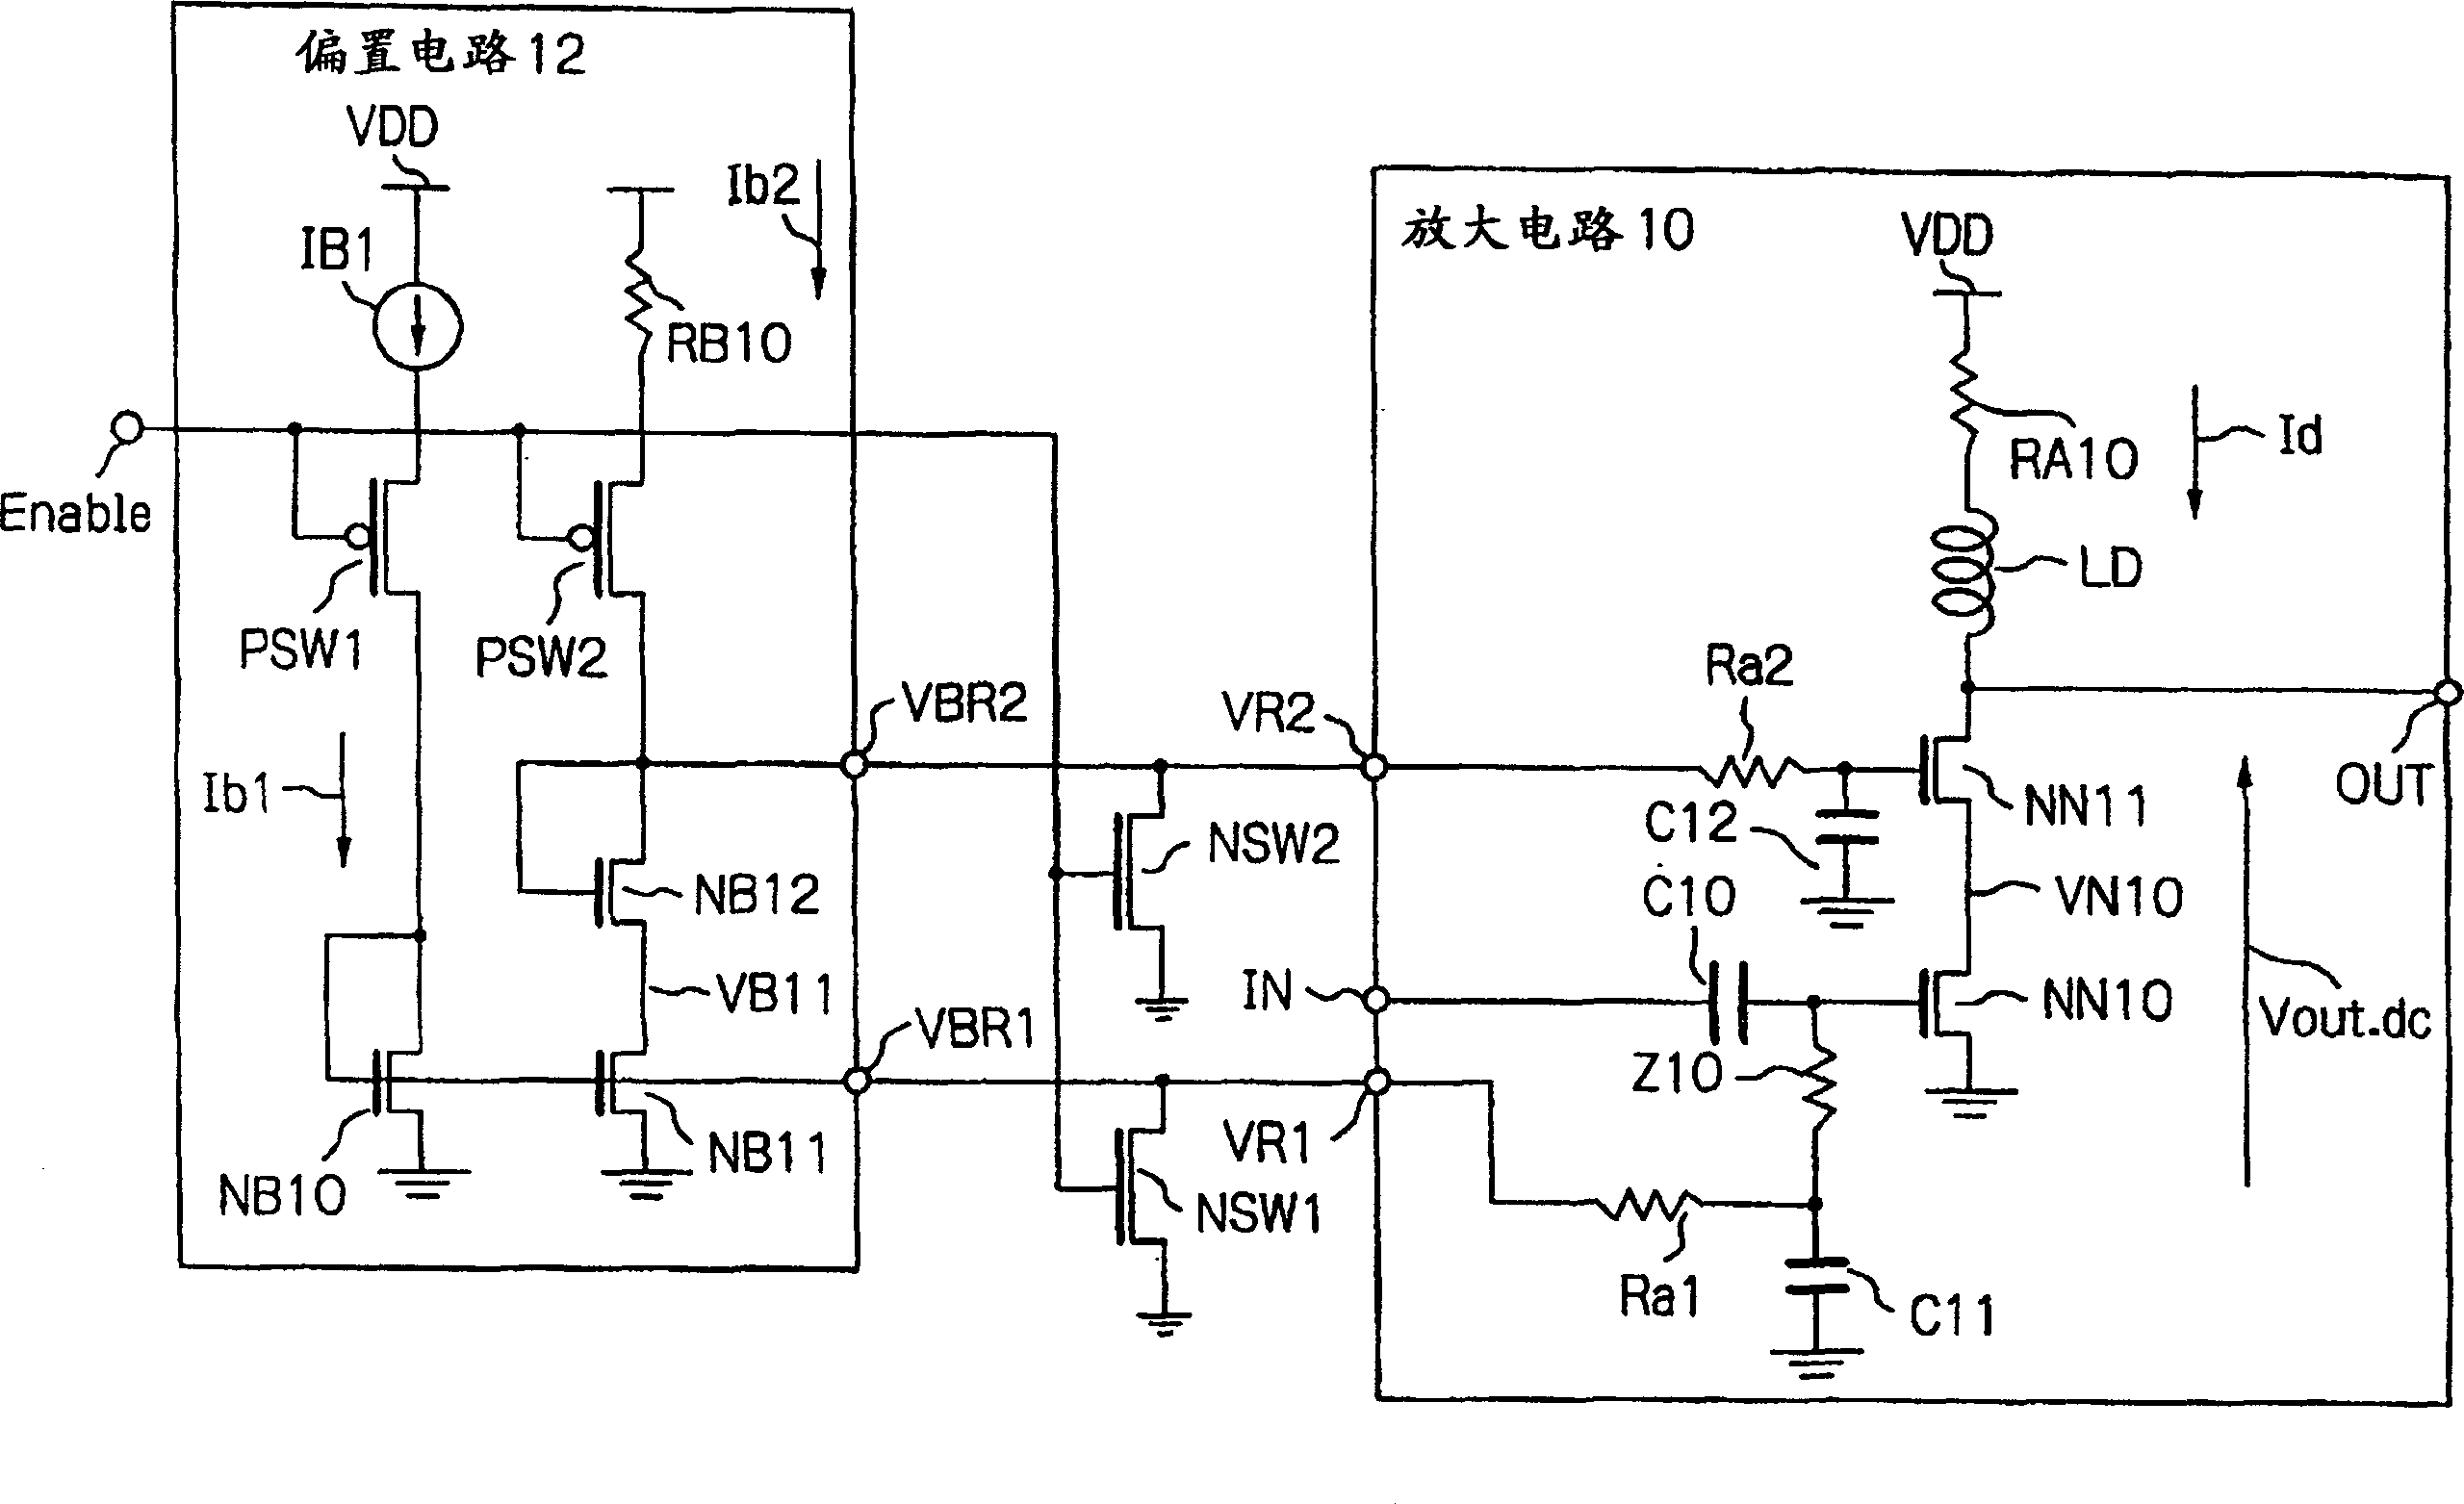 Bias circuit for a wideband amplifier driven with low voltage